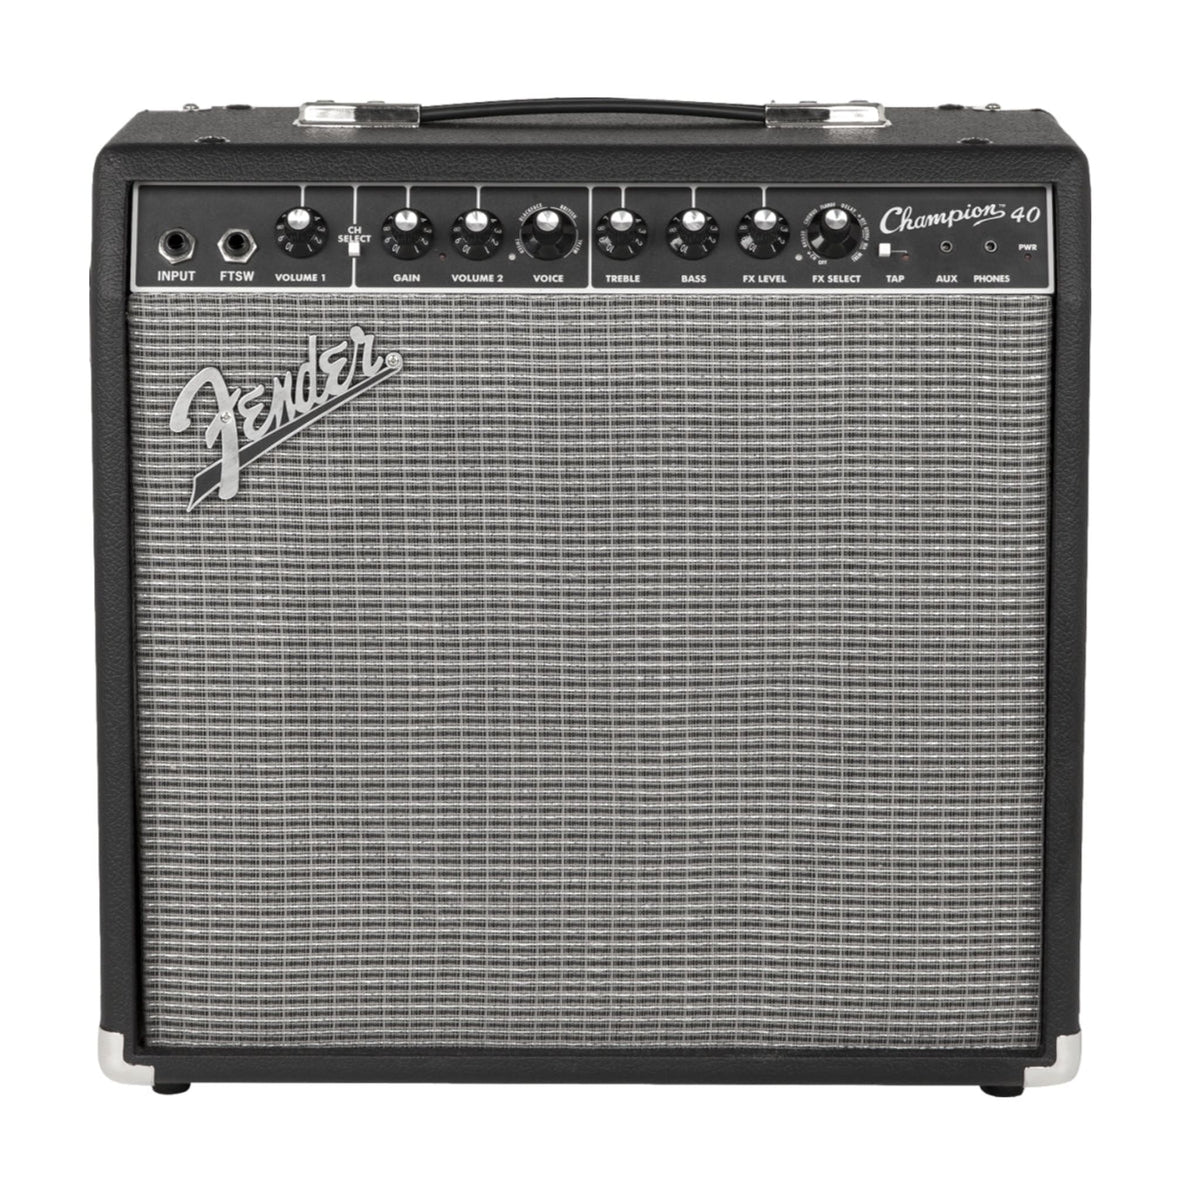 The Fender Champion 40 is easy to use and versatile enough for any style of guitar playing, the 40-watt, 1x12&quot; Champion 40 is an ideal choice as your first practice amp and an affordable stage amp.